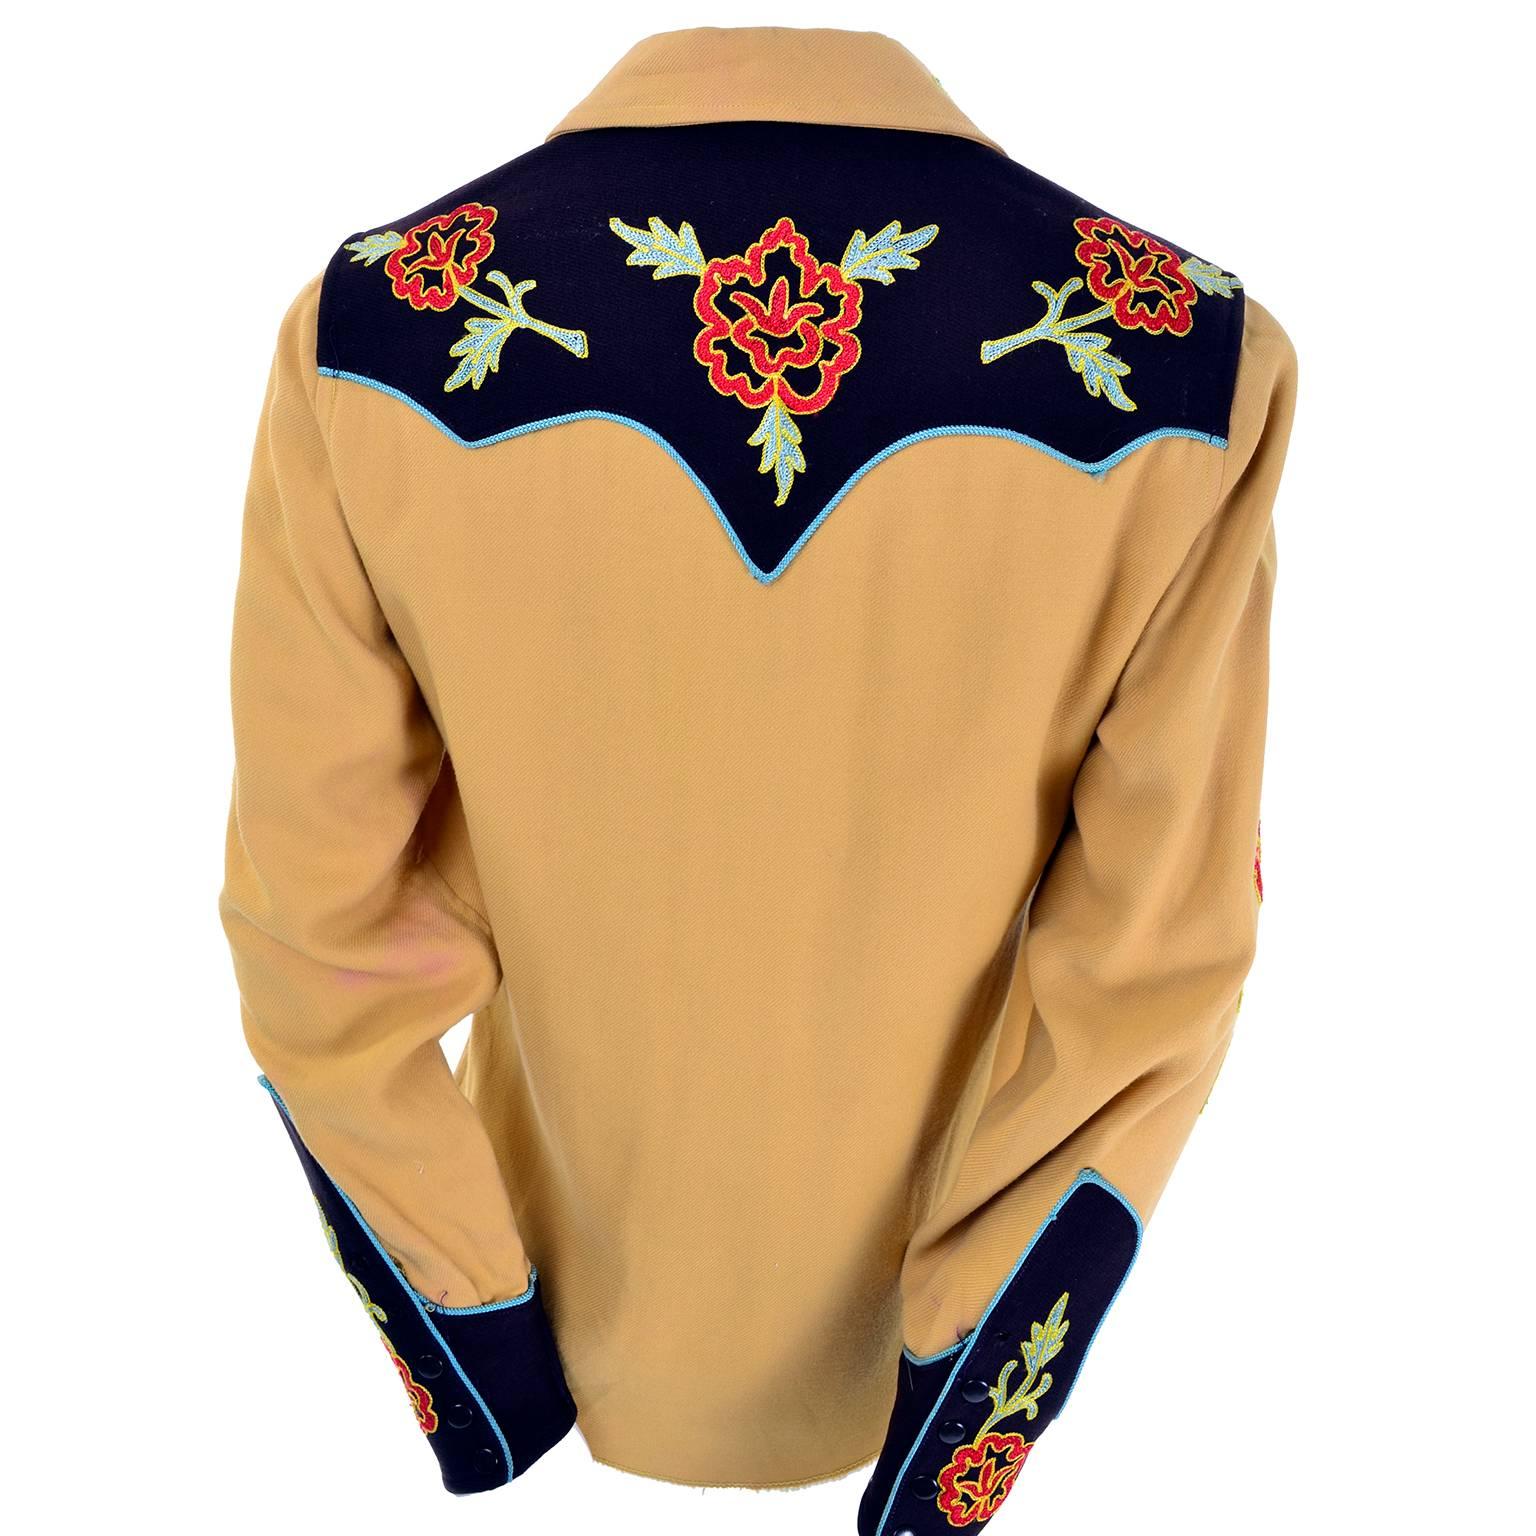 This vintage gold wool gabardine western shirt was made by Vaquero Fashions.  The shirt snaps up the front and has blue trim and embroidered flowers. We acquired this from an estate we were fortunate to be able to handle that included vintage 1940's